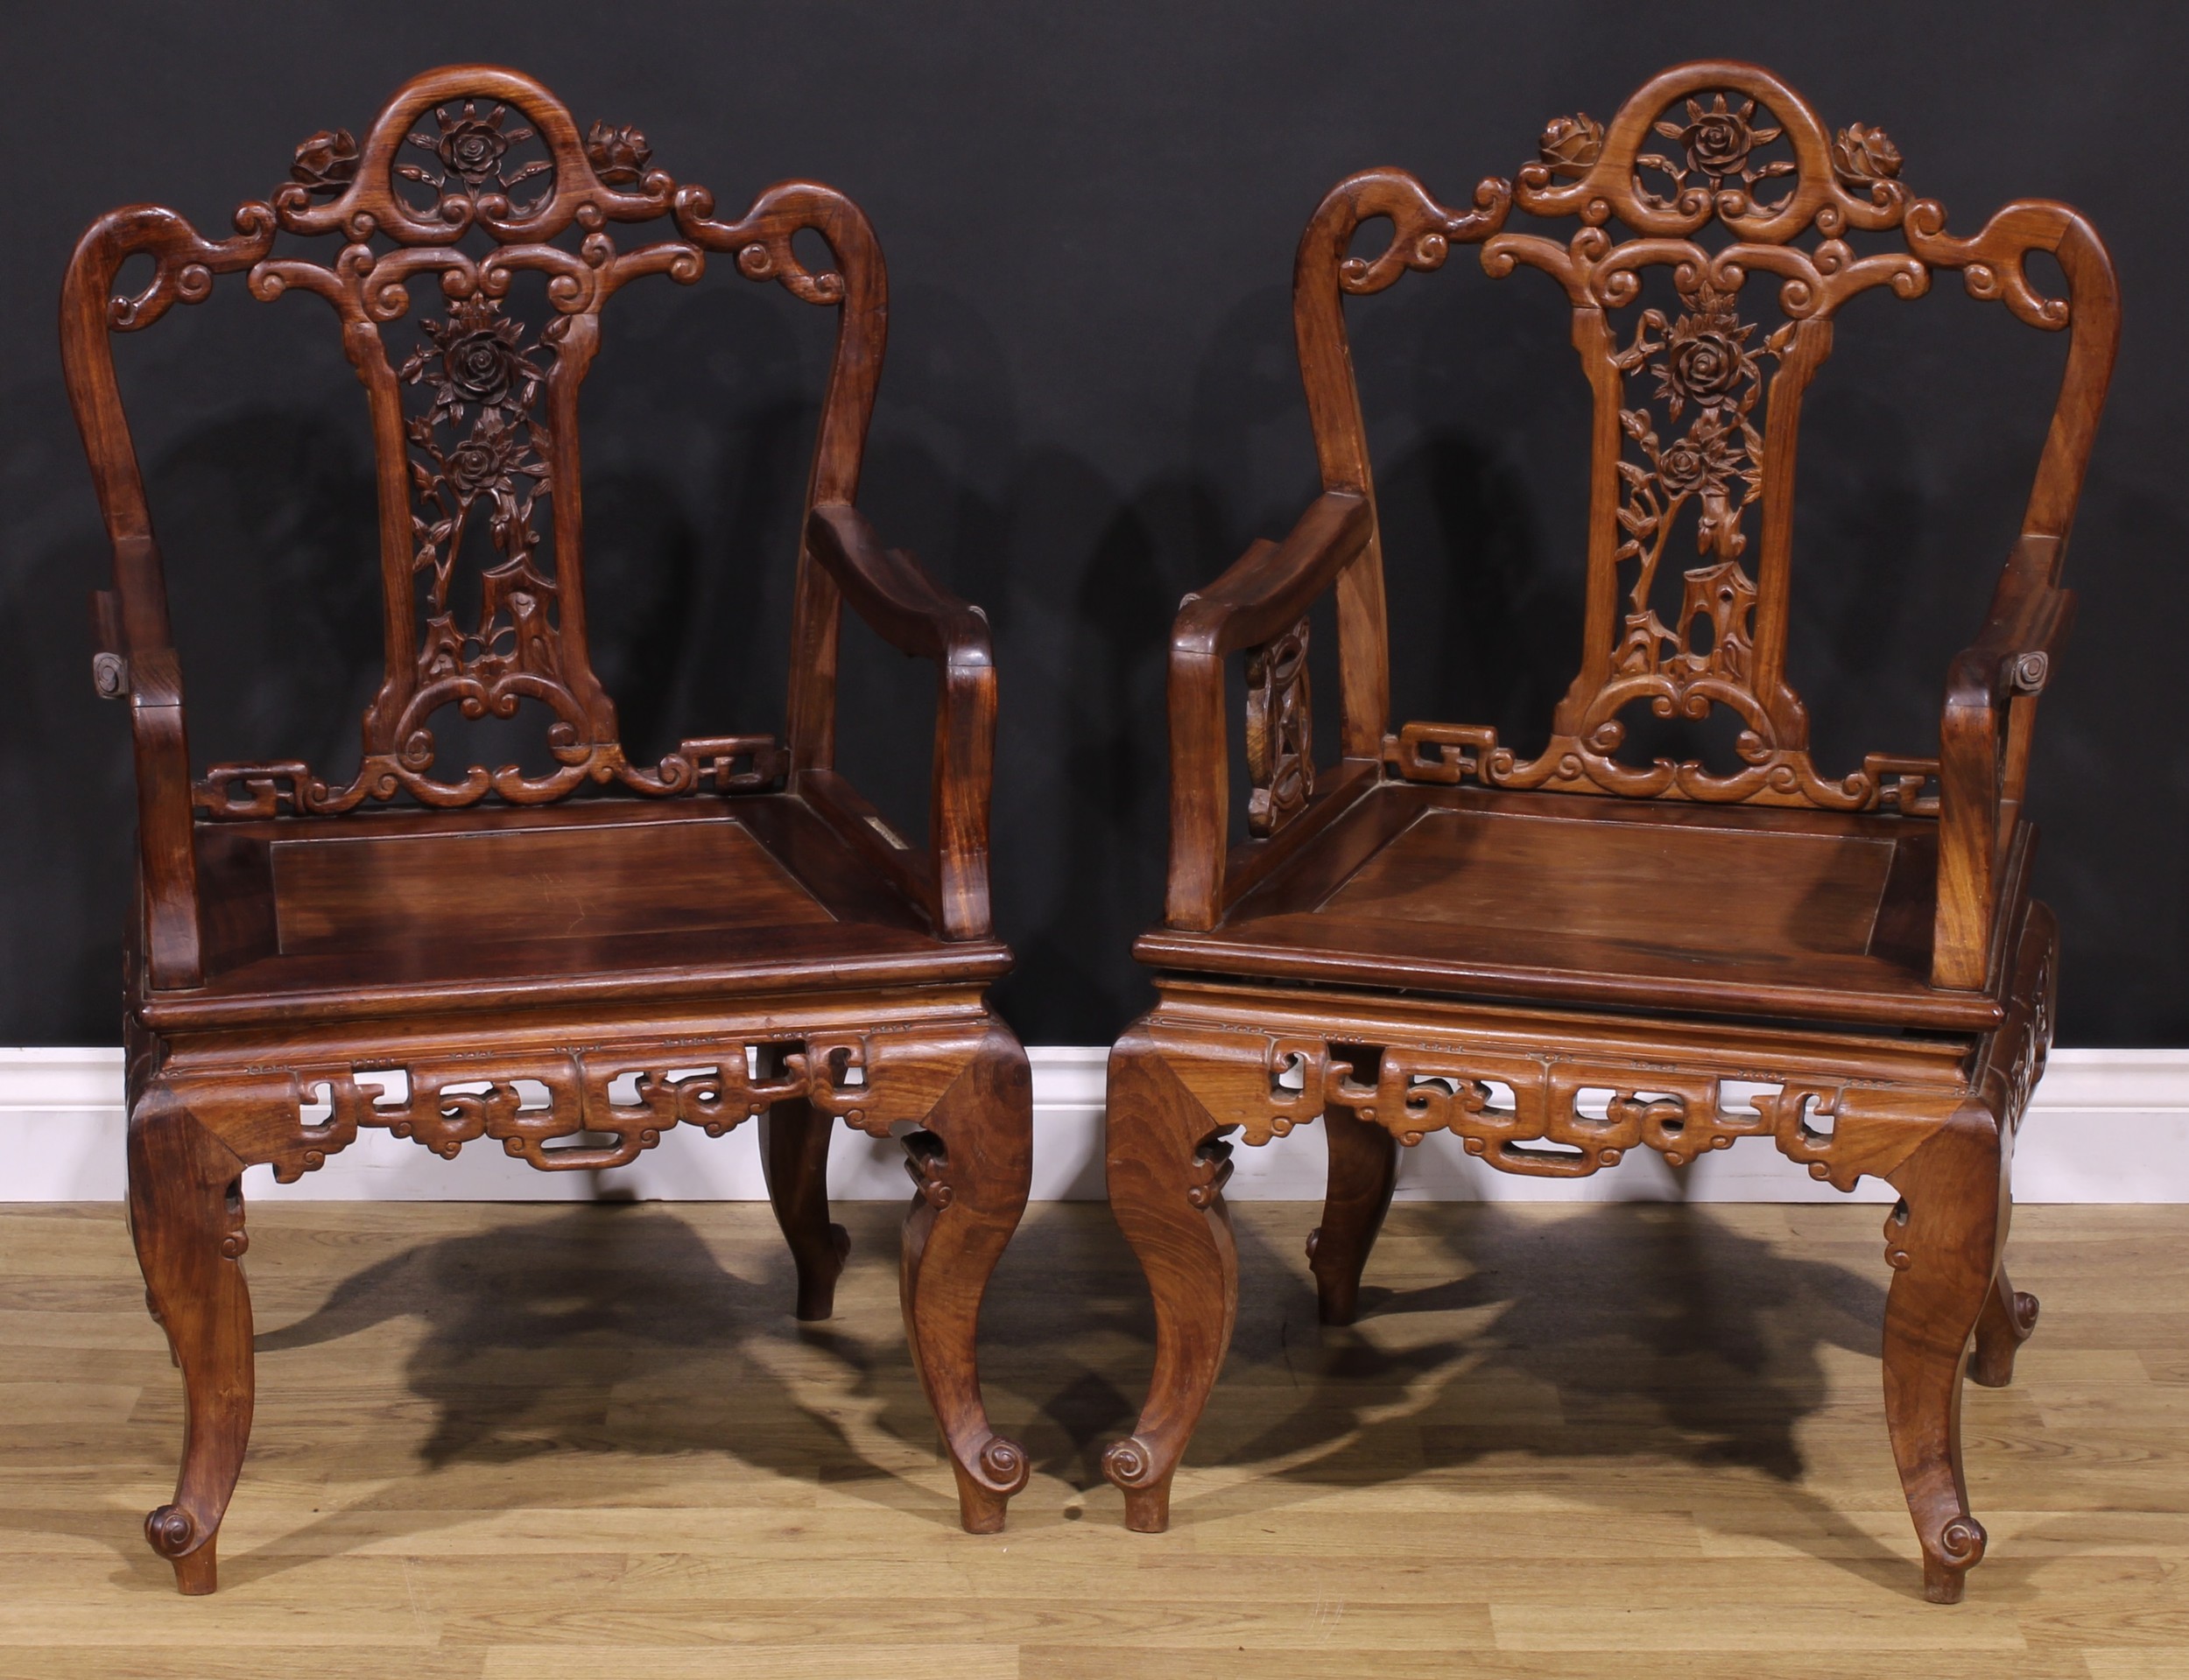 A pair of Chinese hardwood armchairs, each with a shaped back pierced and carved with scrolls and